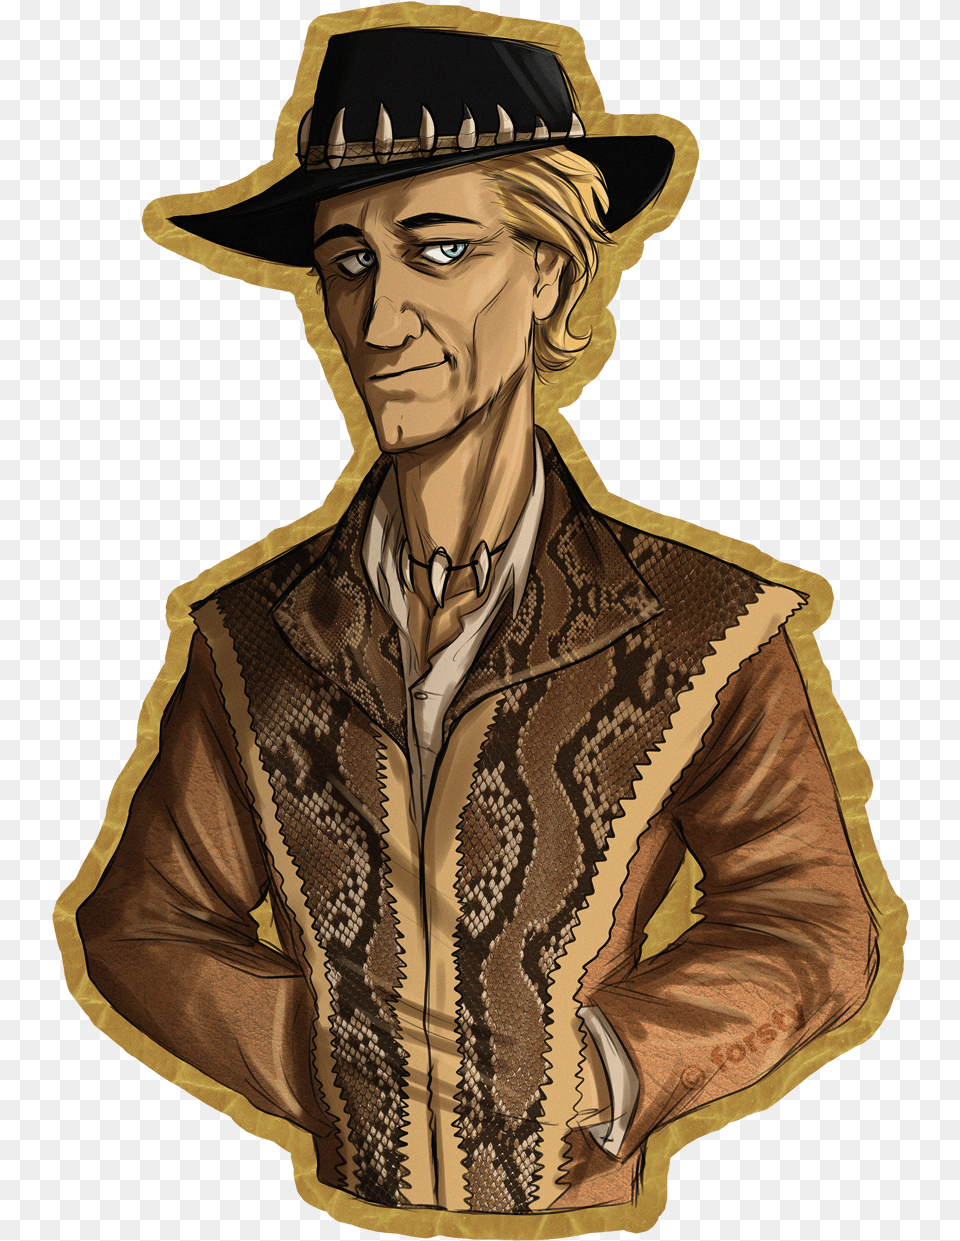 Crocodile Dundee Images Tumblr Mpd3lqud7r1rxueebo1 Crocodile Dundee, Adult, Person, Jacket, Woman Free Png Download